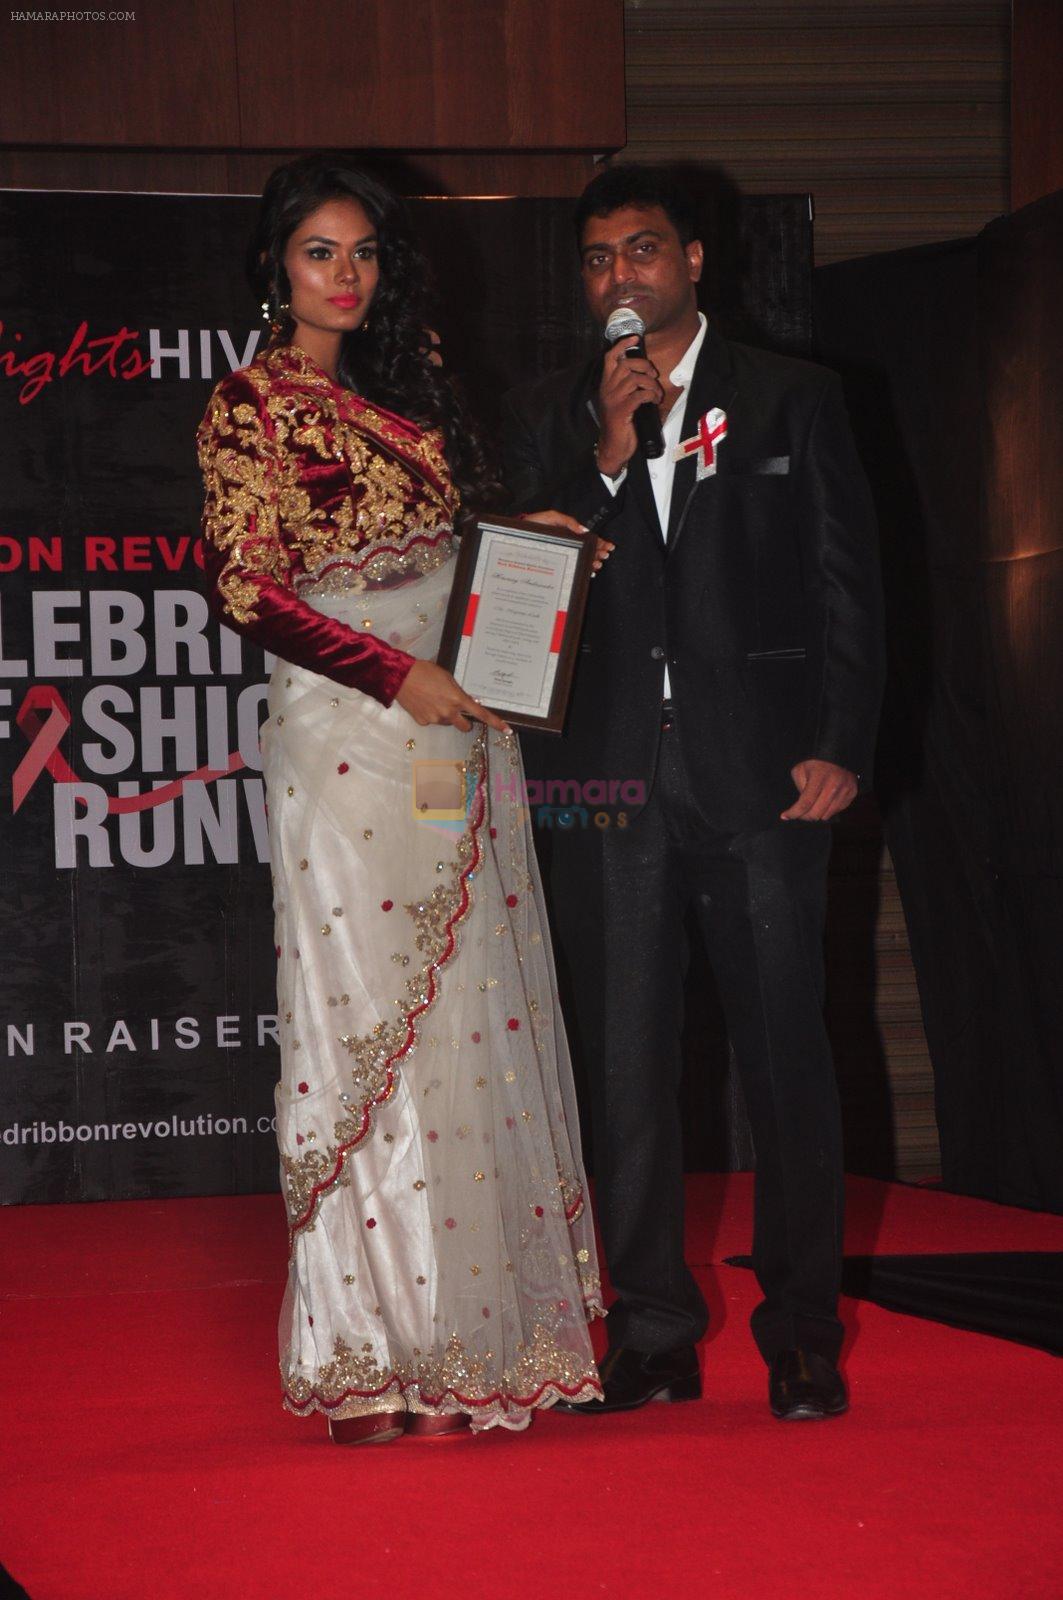 at Fashion Event for world aids day in Mumbai on 1st Dec 2014